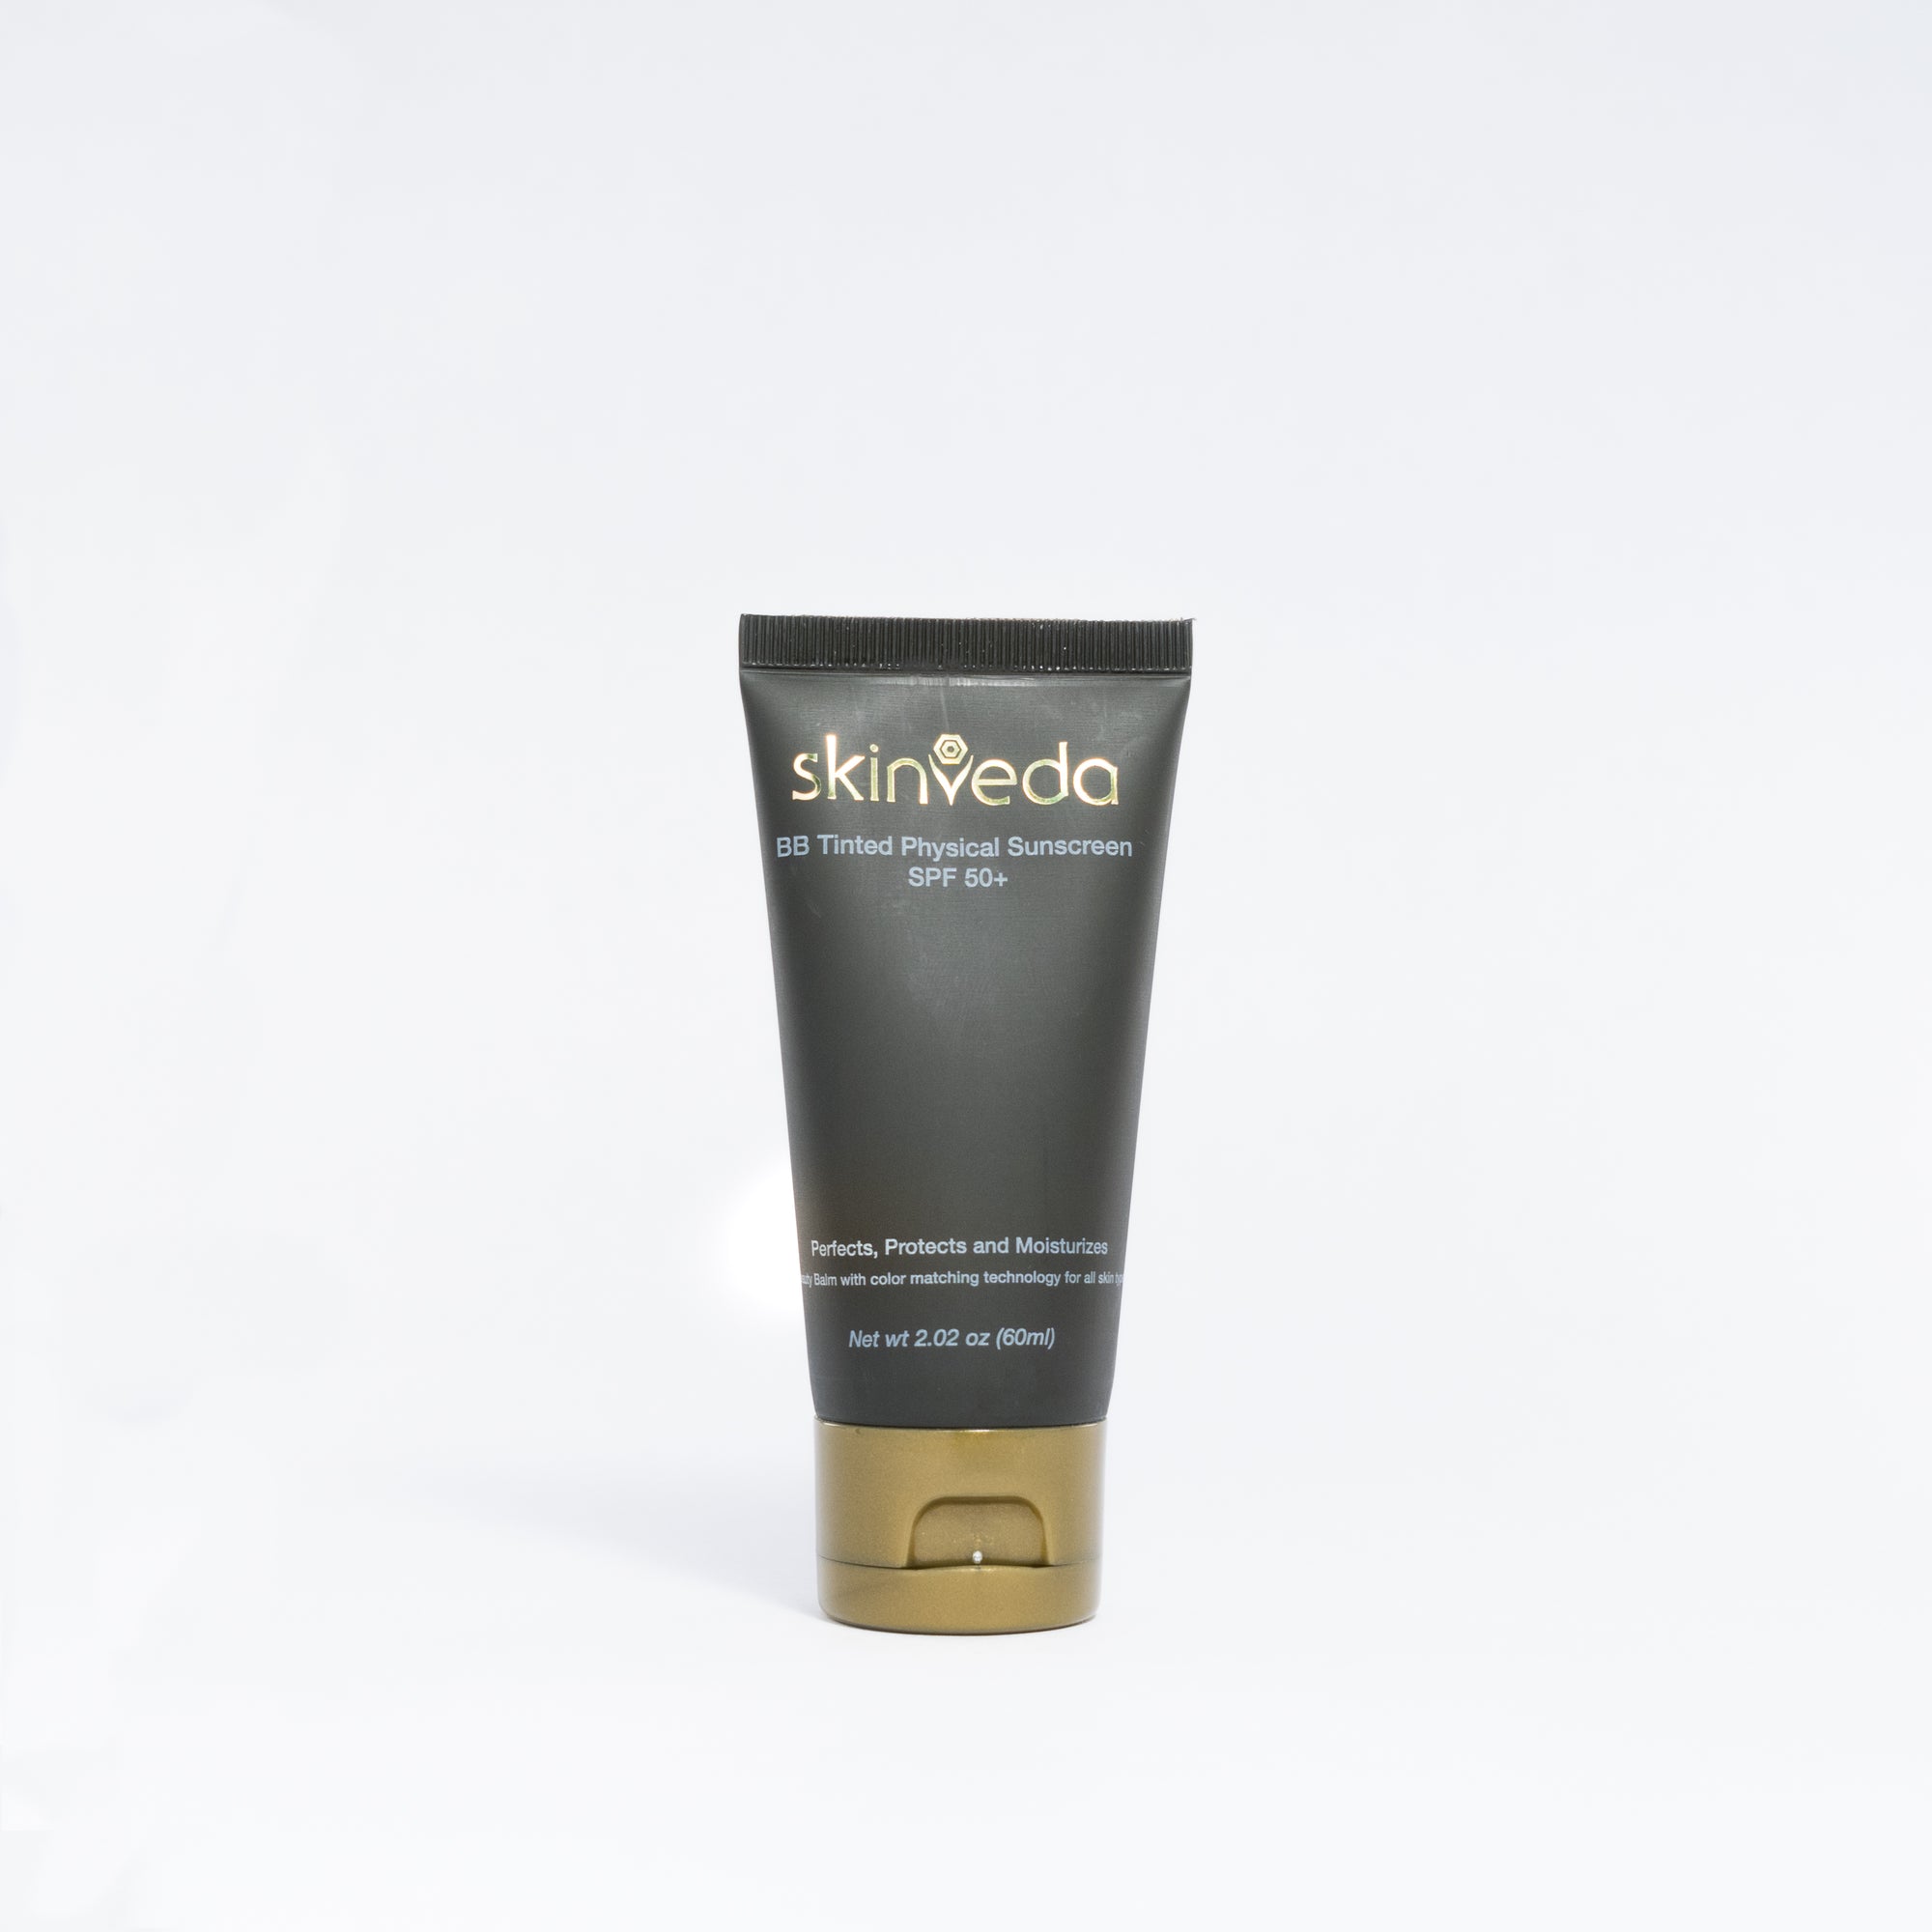 BB Tinted Physical Sunscreen SPF 50